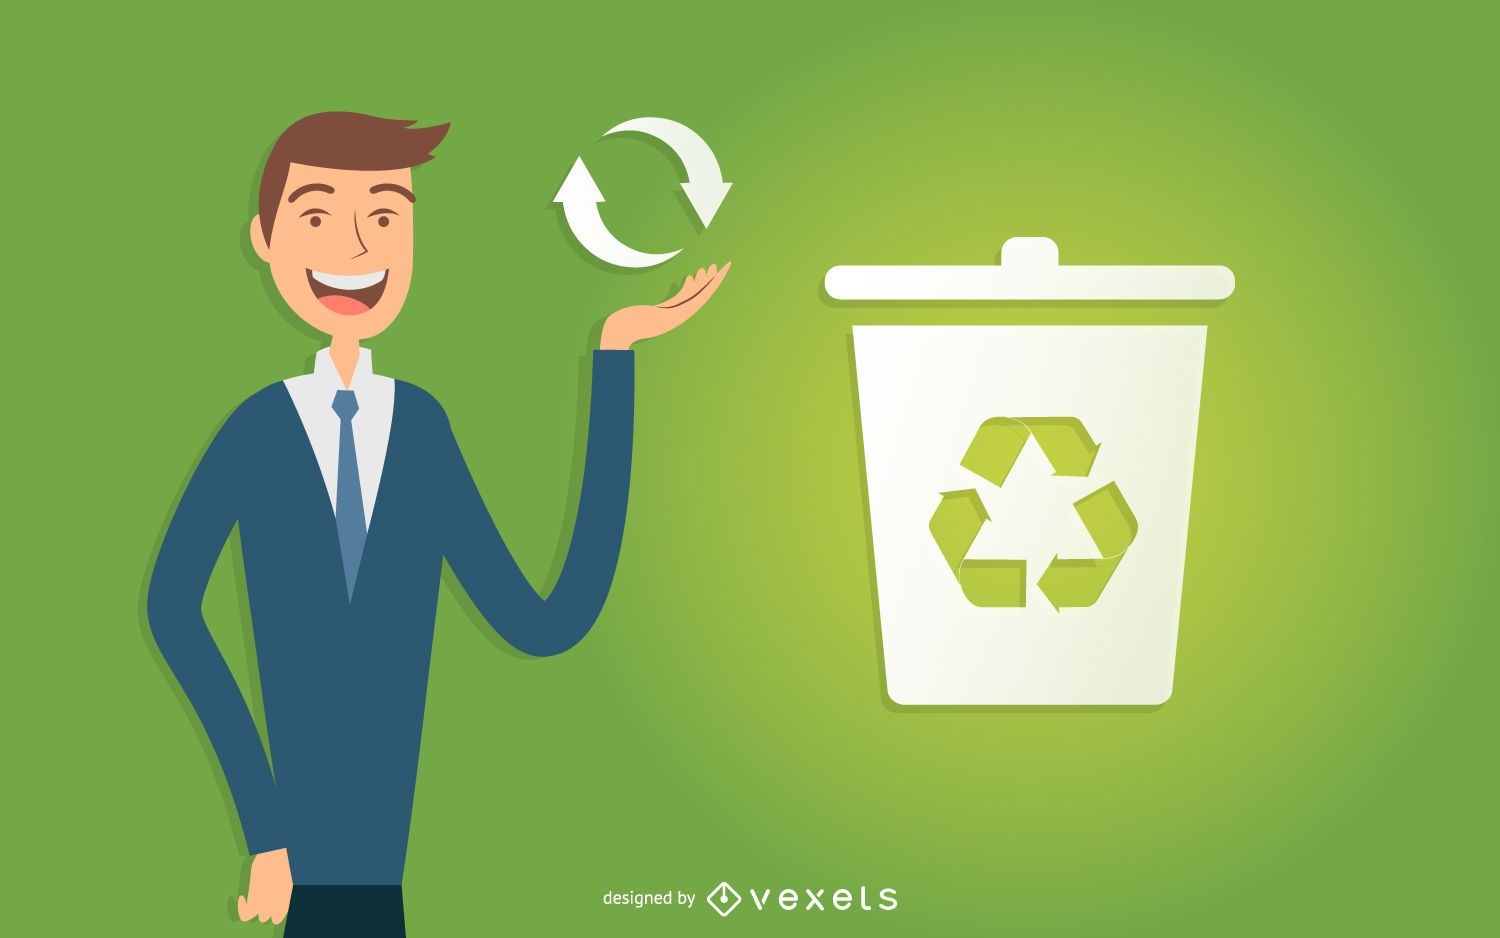 Illustrated business man recycling